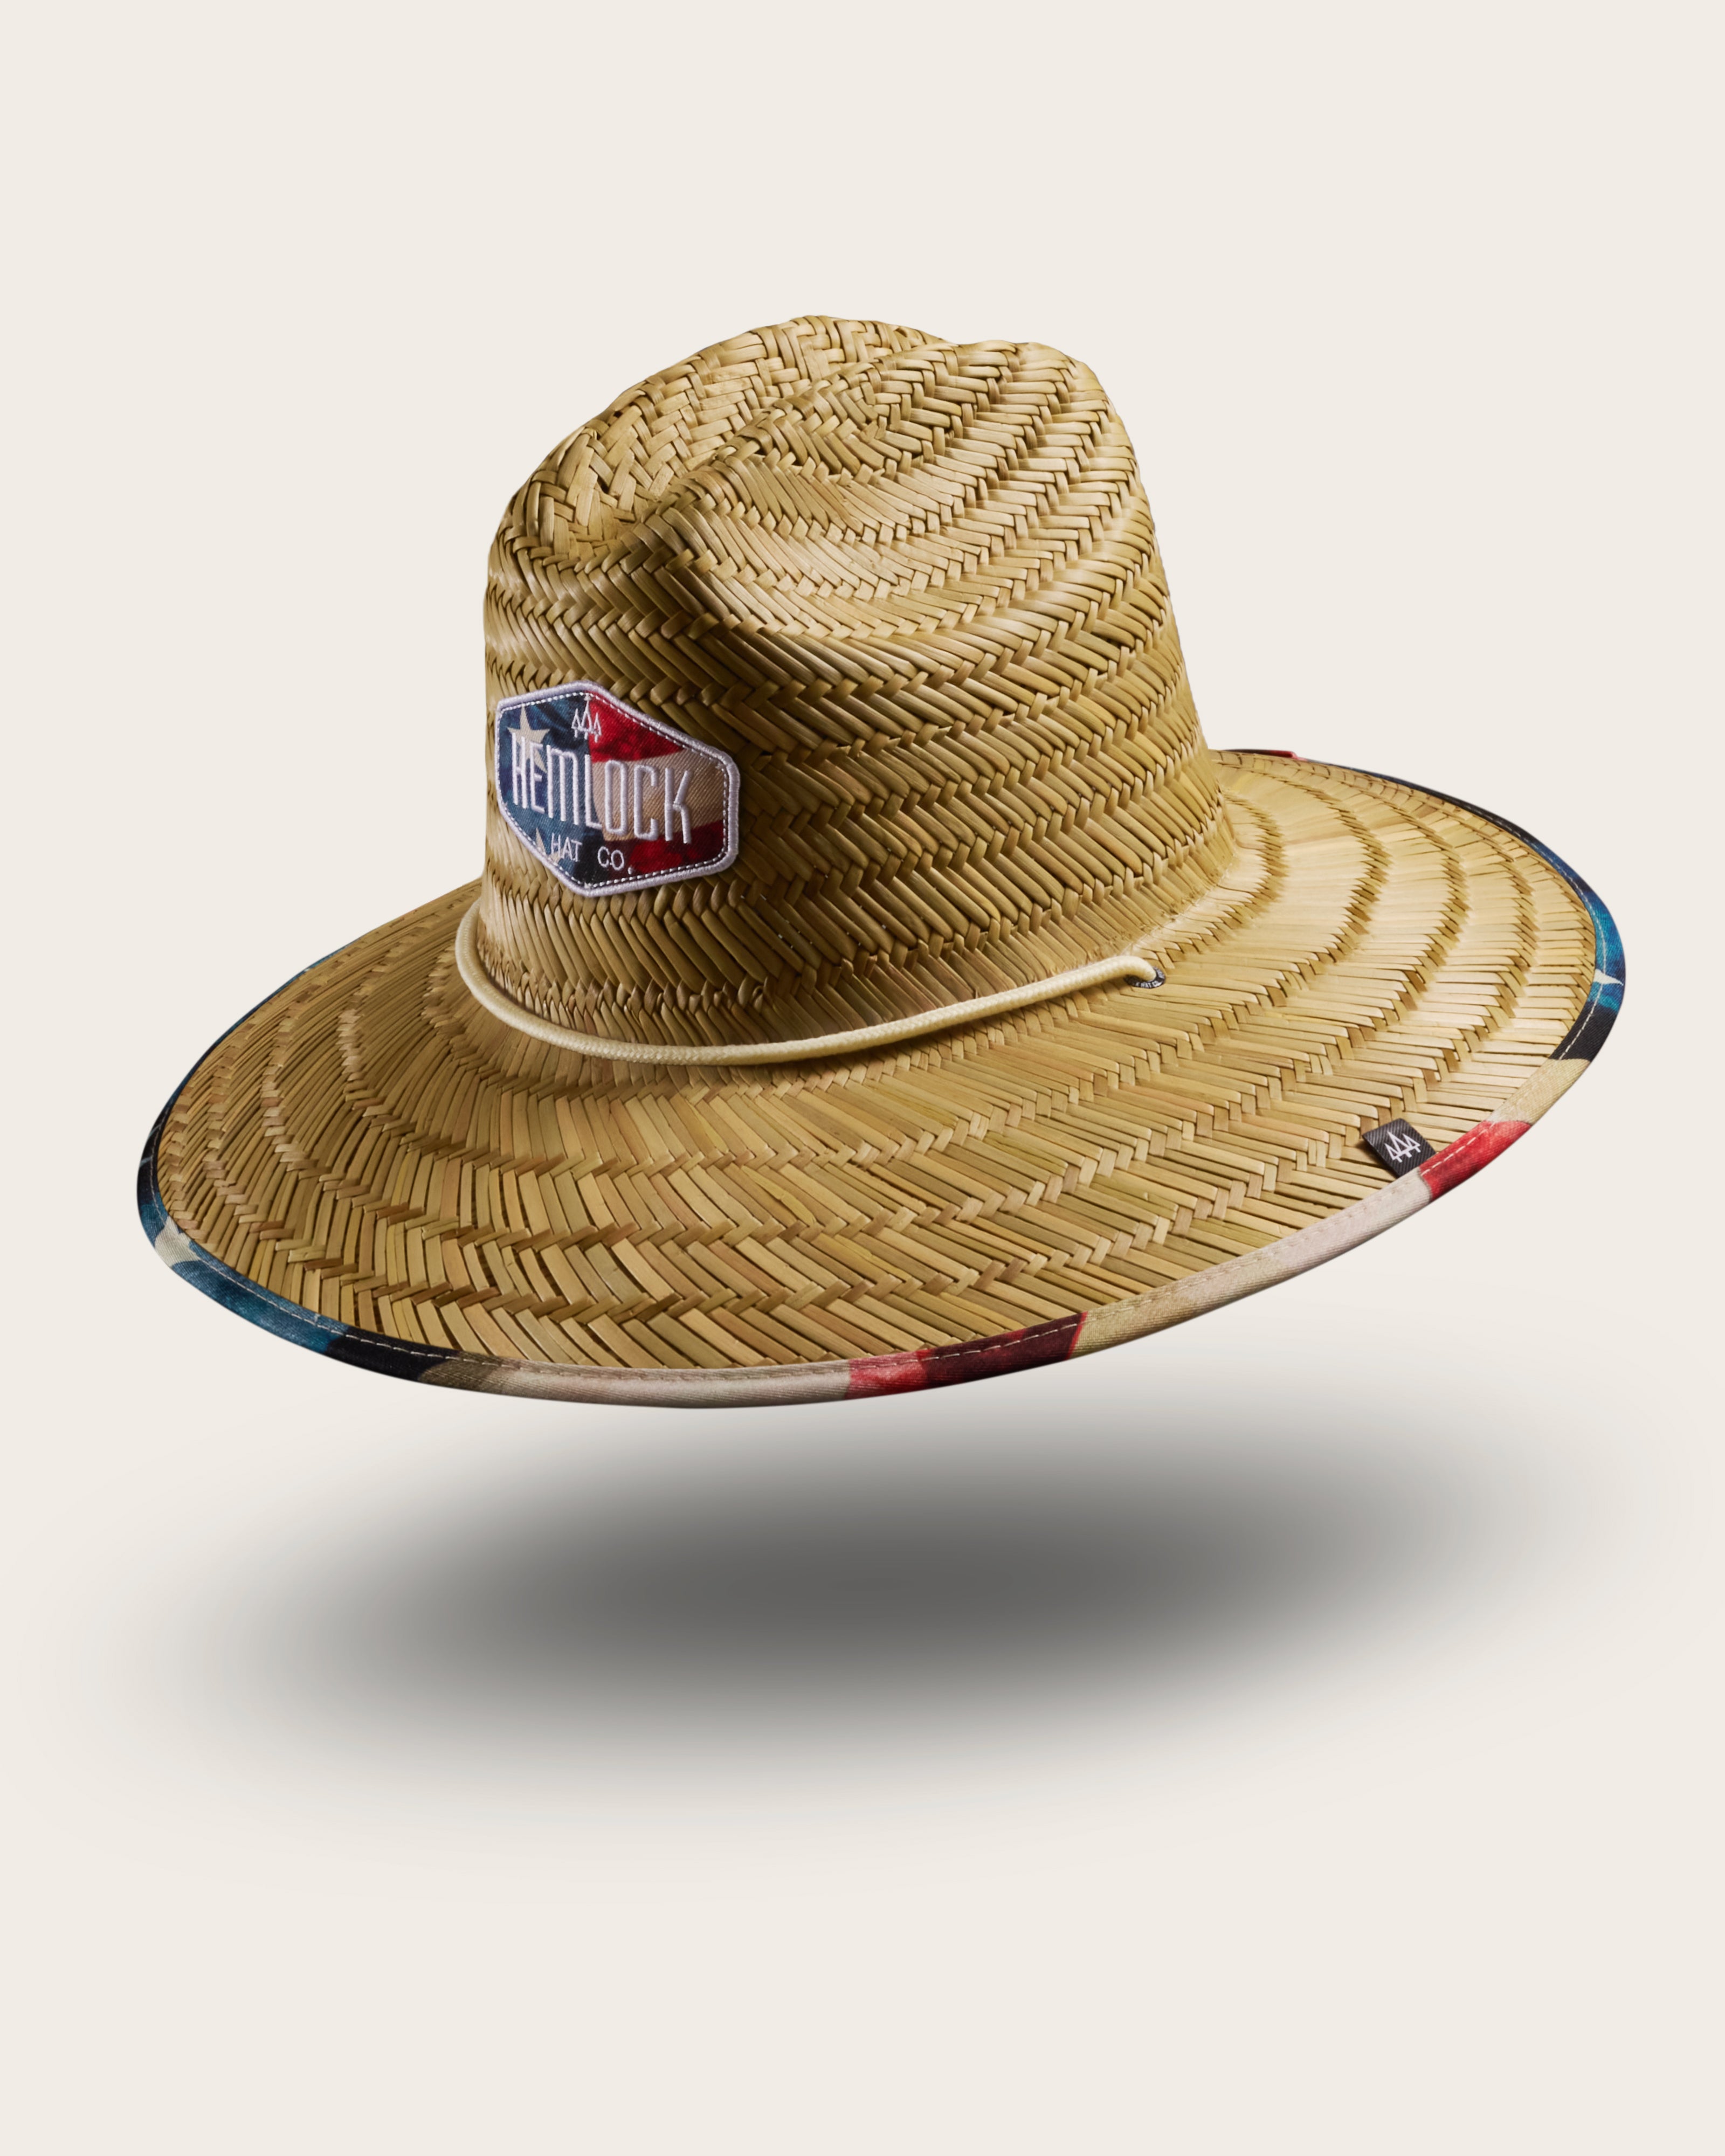 Hemlock Liberty straw lifeguard hat with USA flag pattern with patch